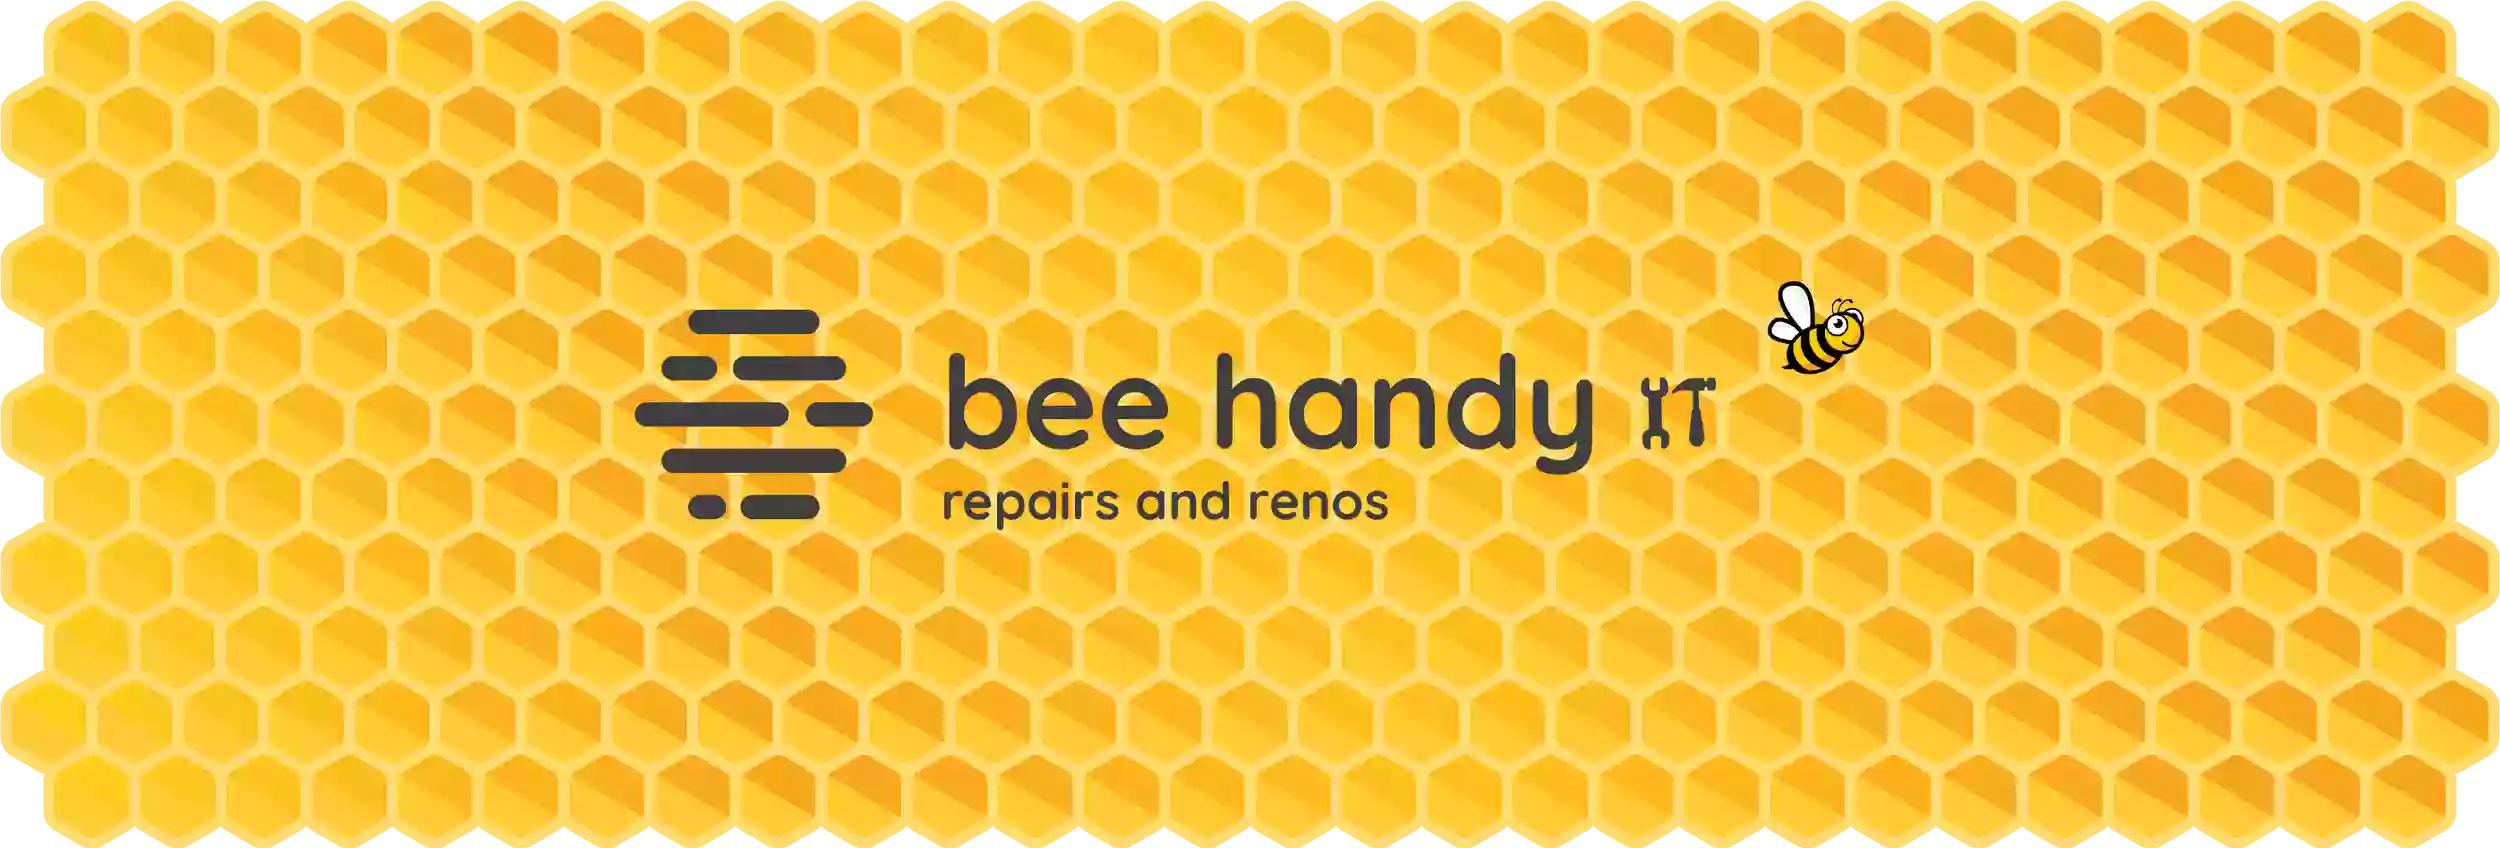 Bee Handy | Handyman and trades services